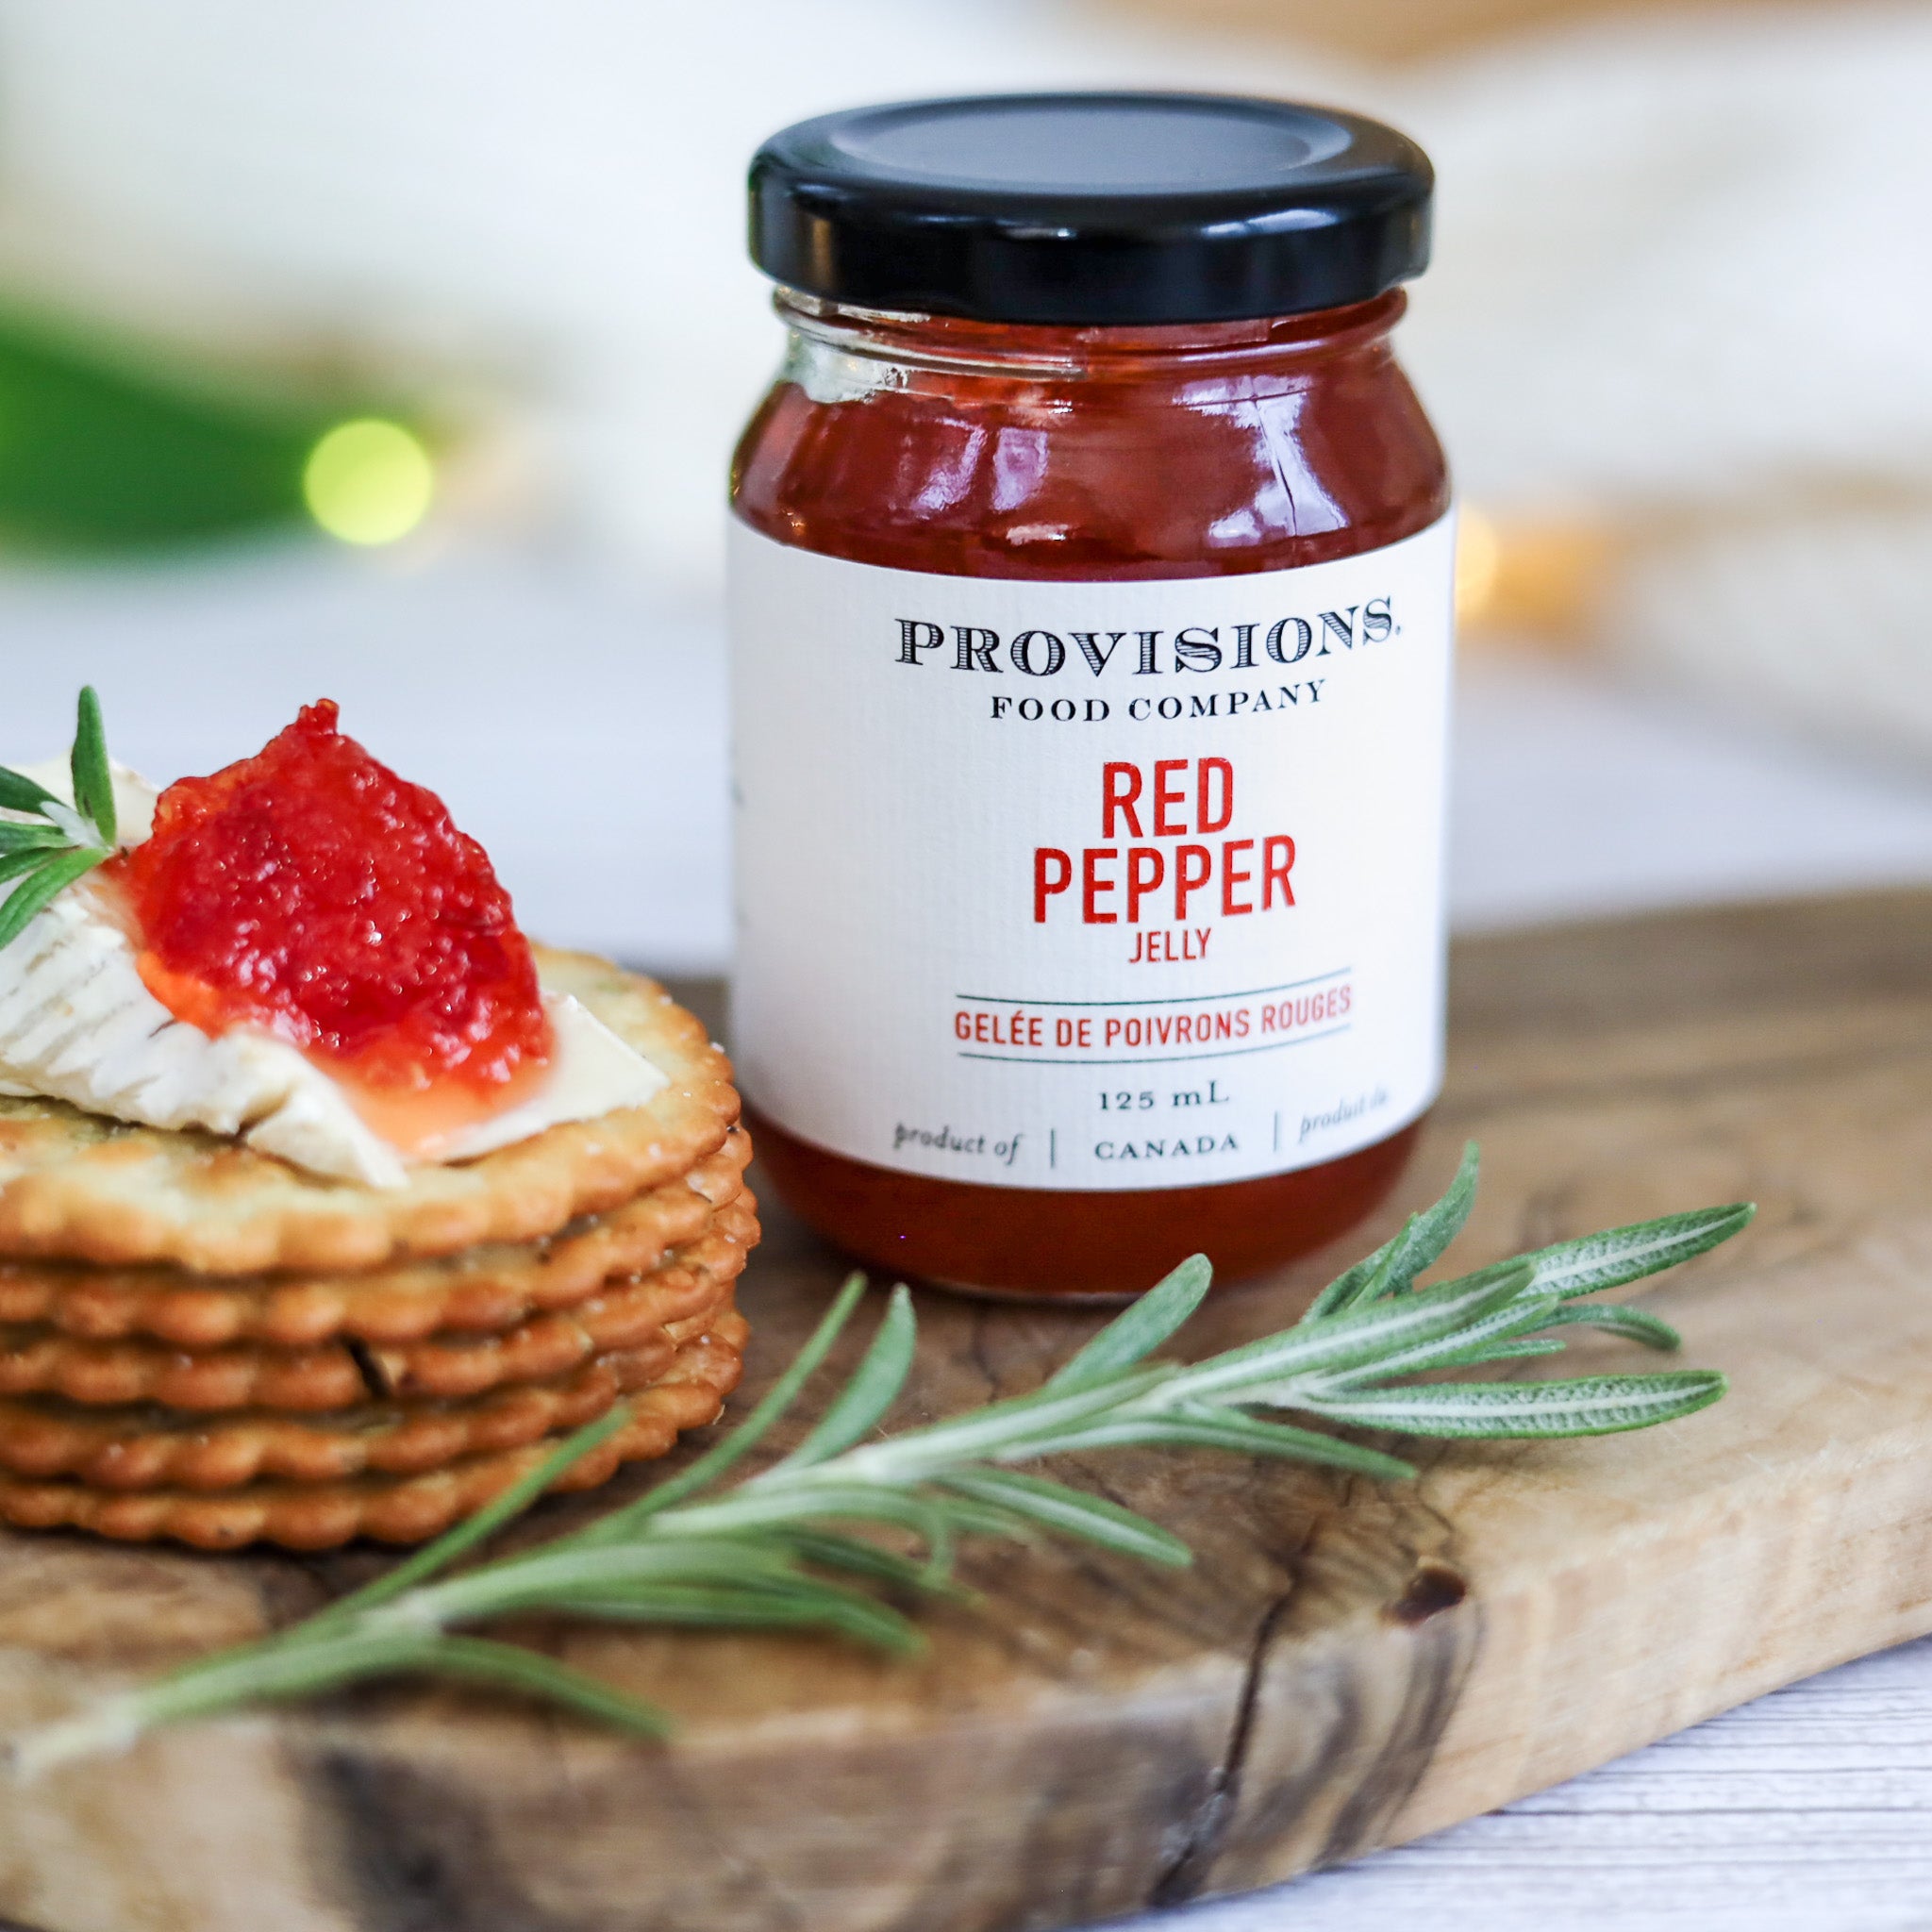 RED PEPPER JELLY – Provisions Food Company